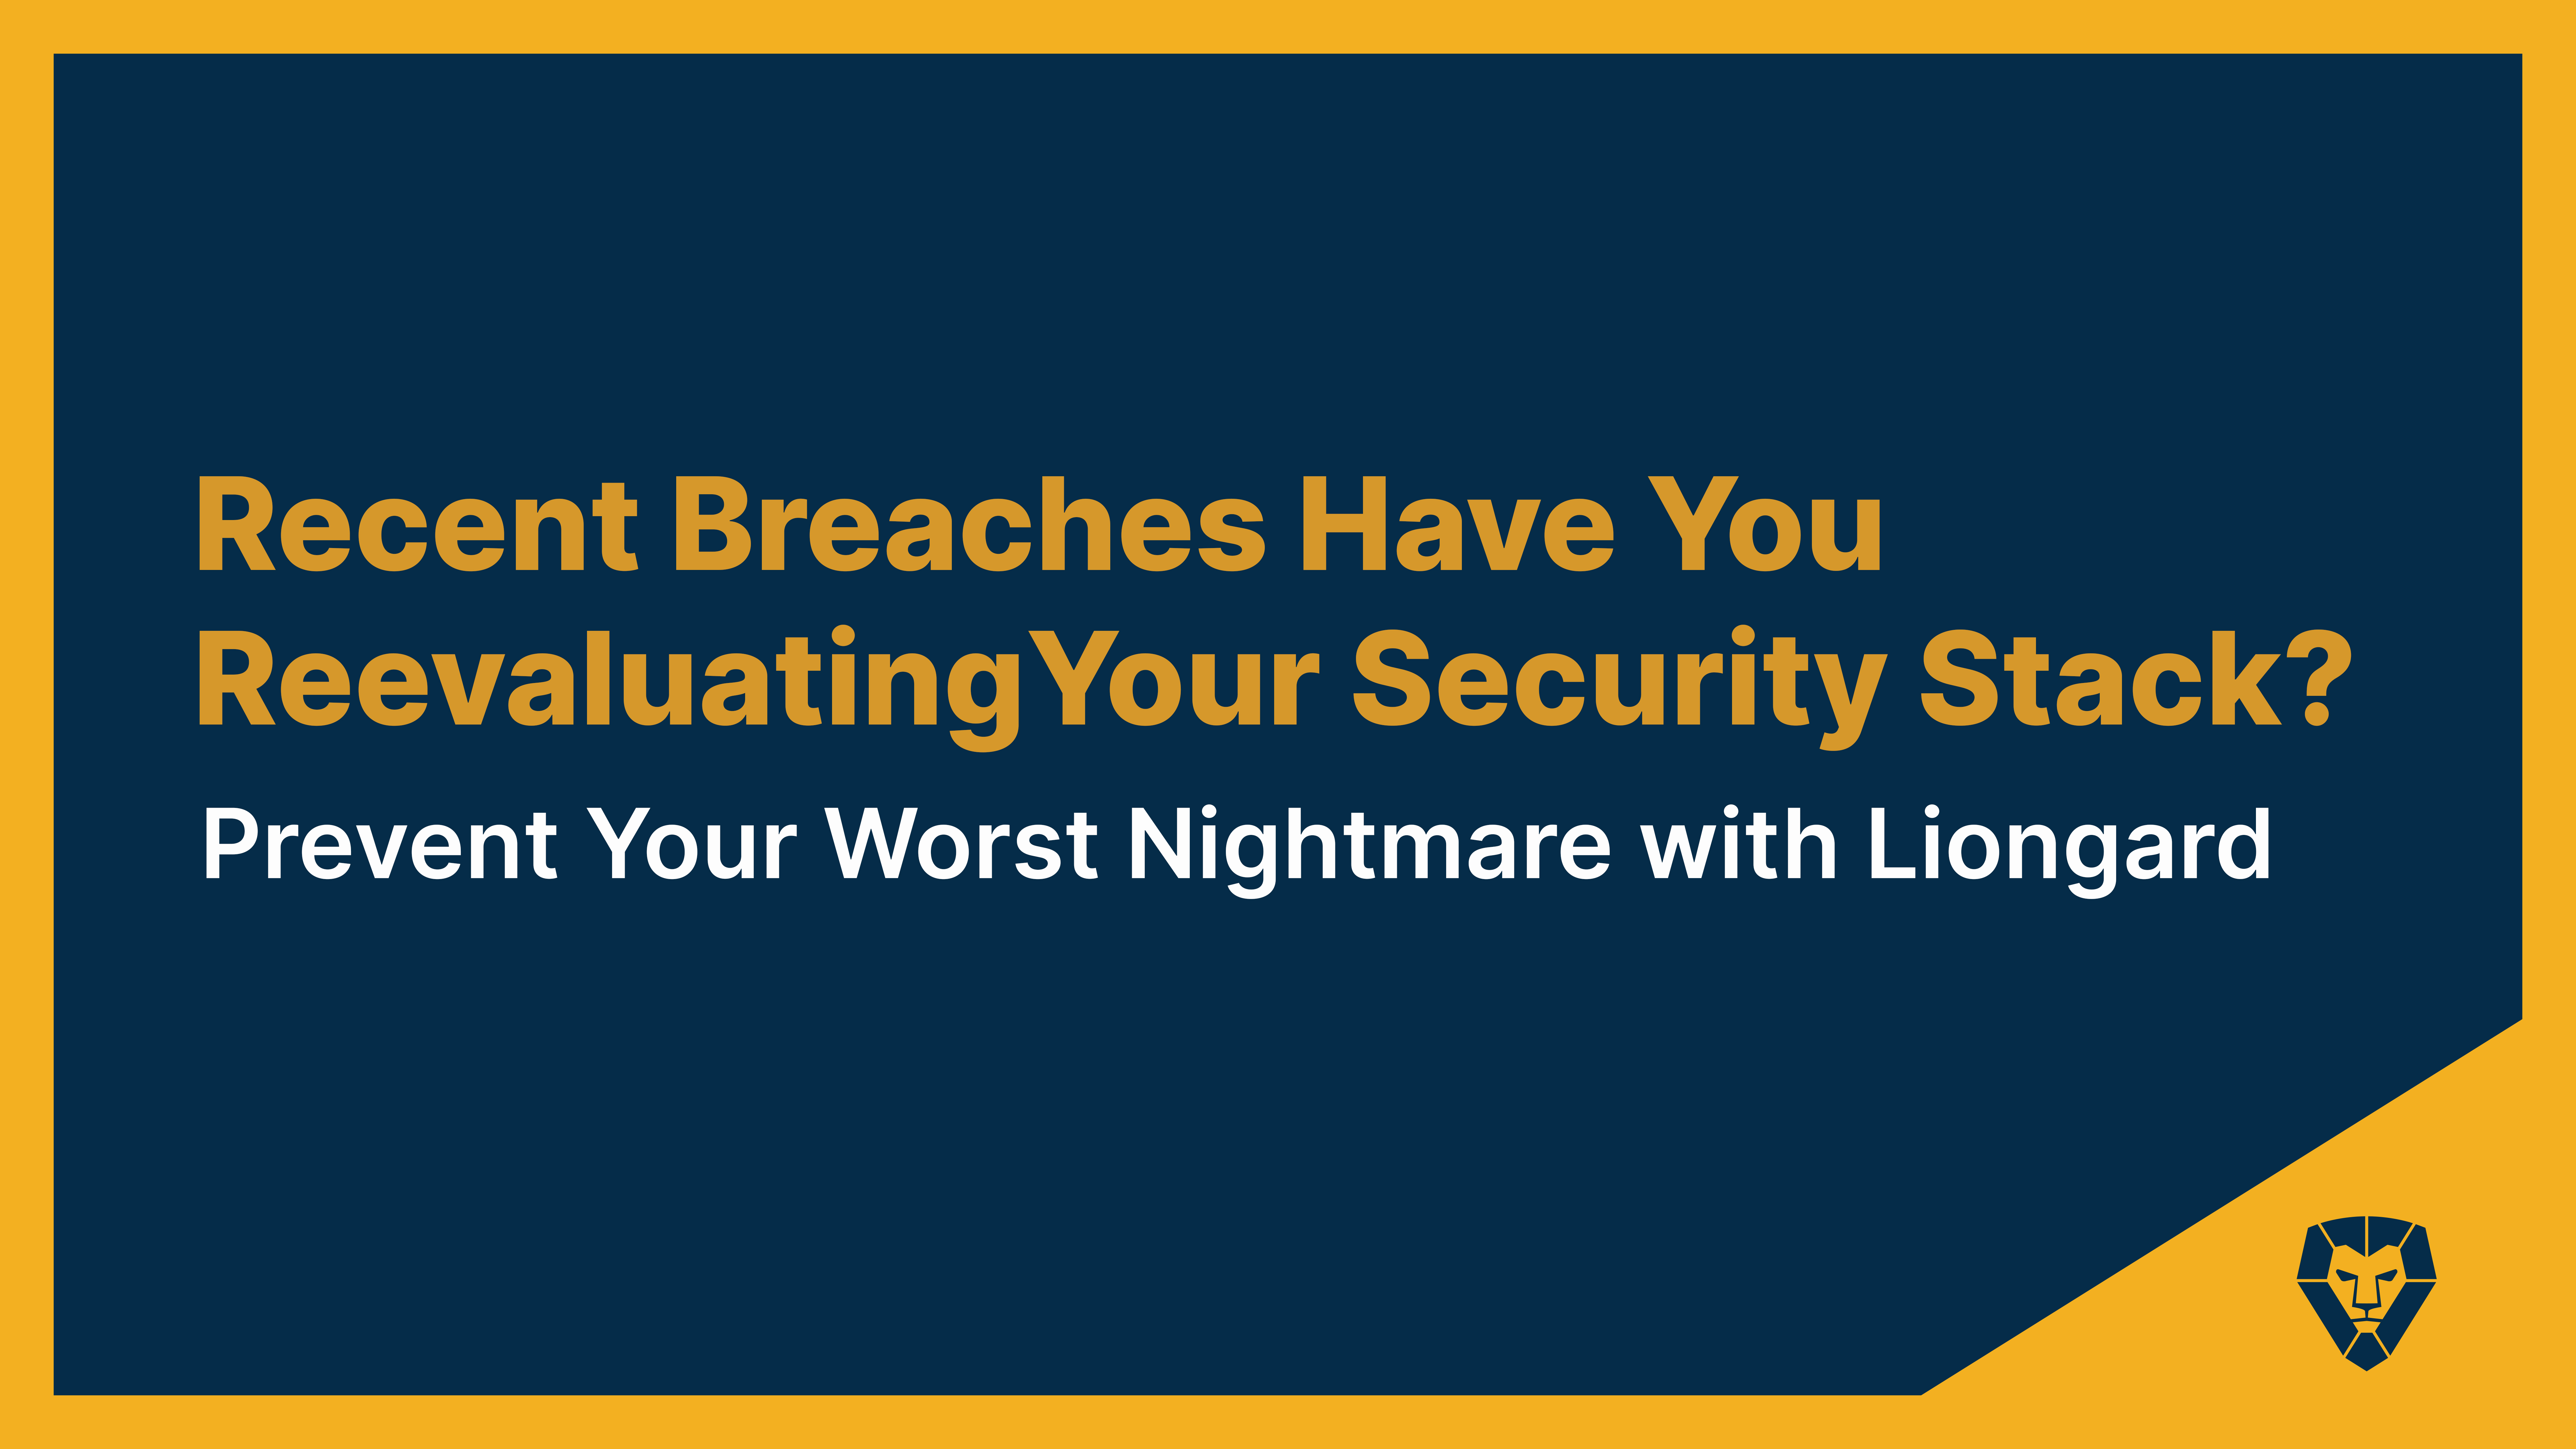 Reevaluate your security stack with Liongard